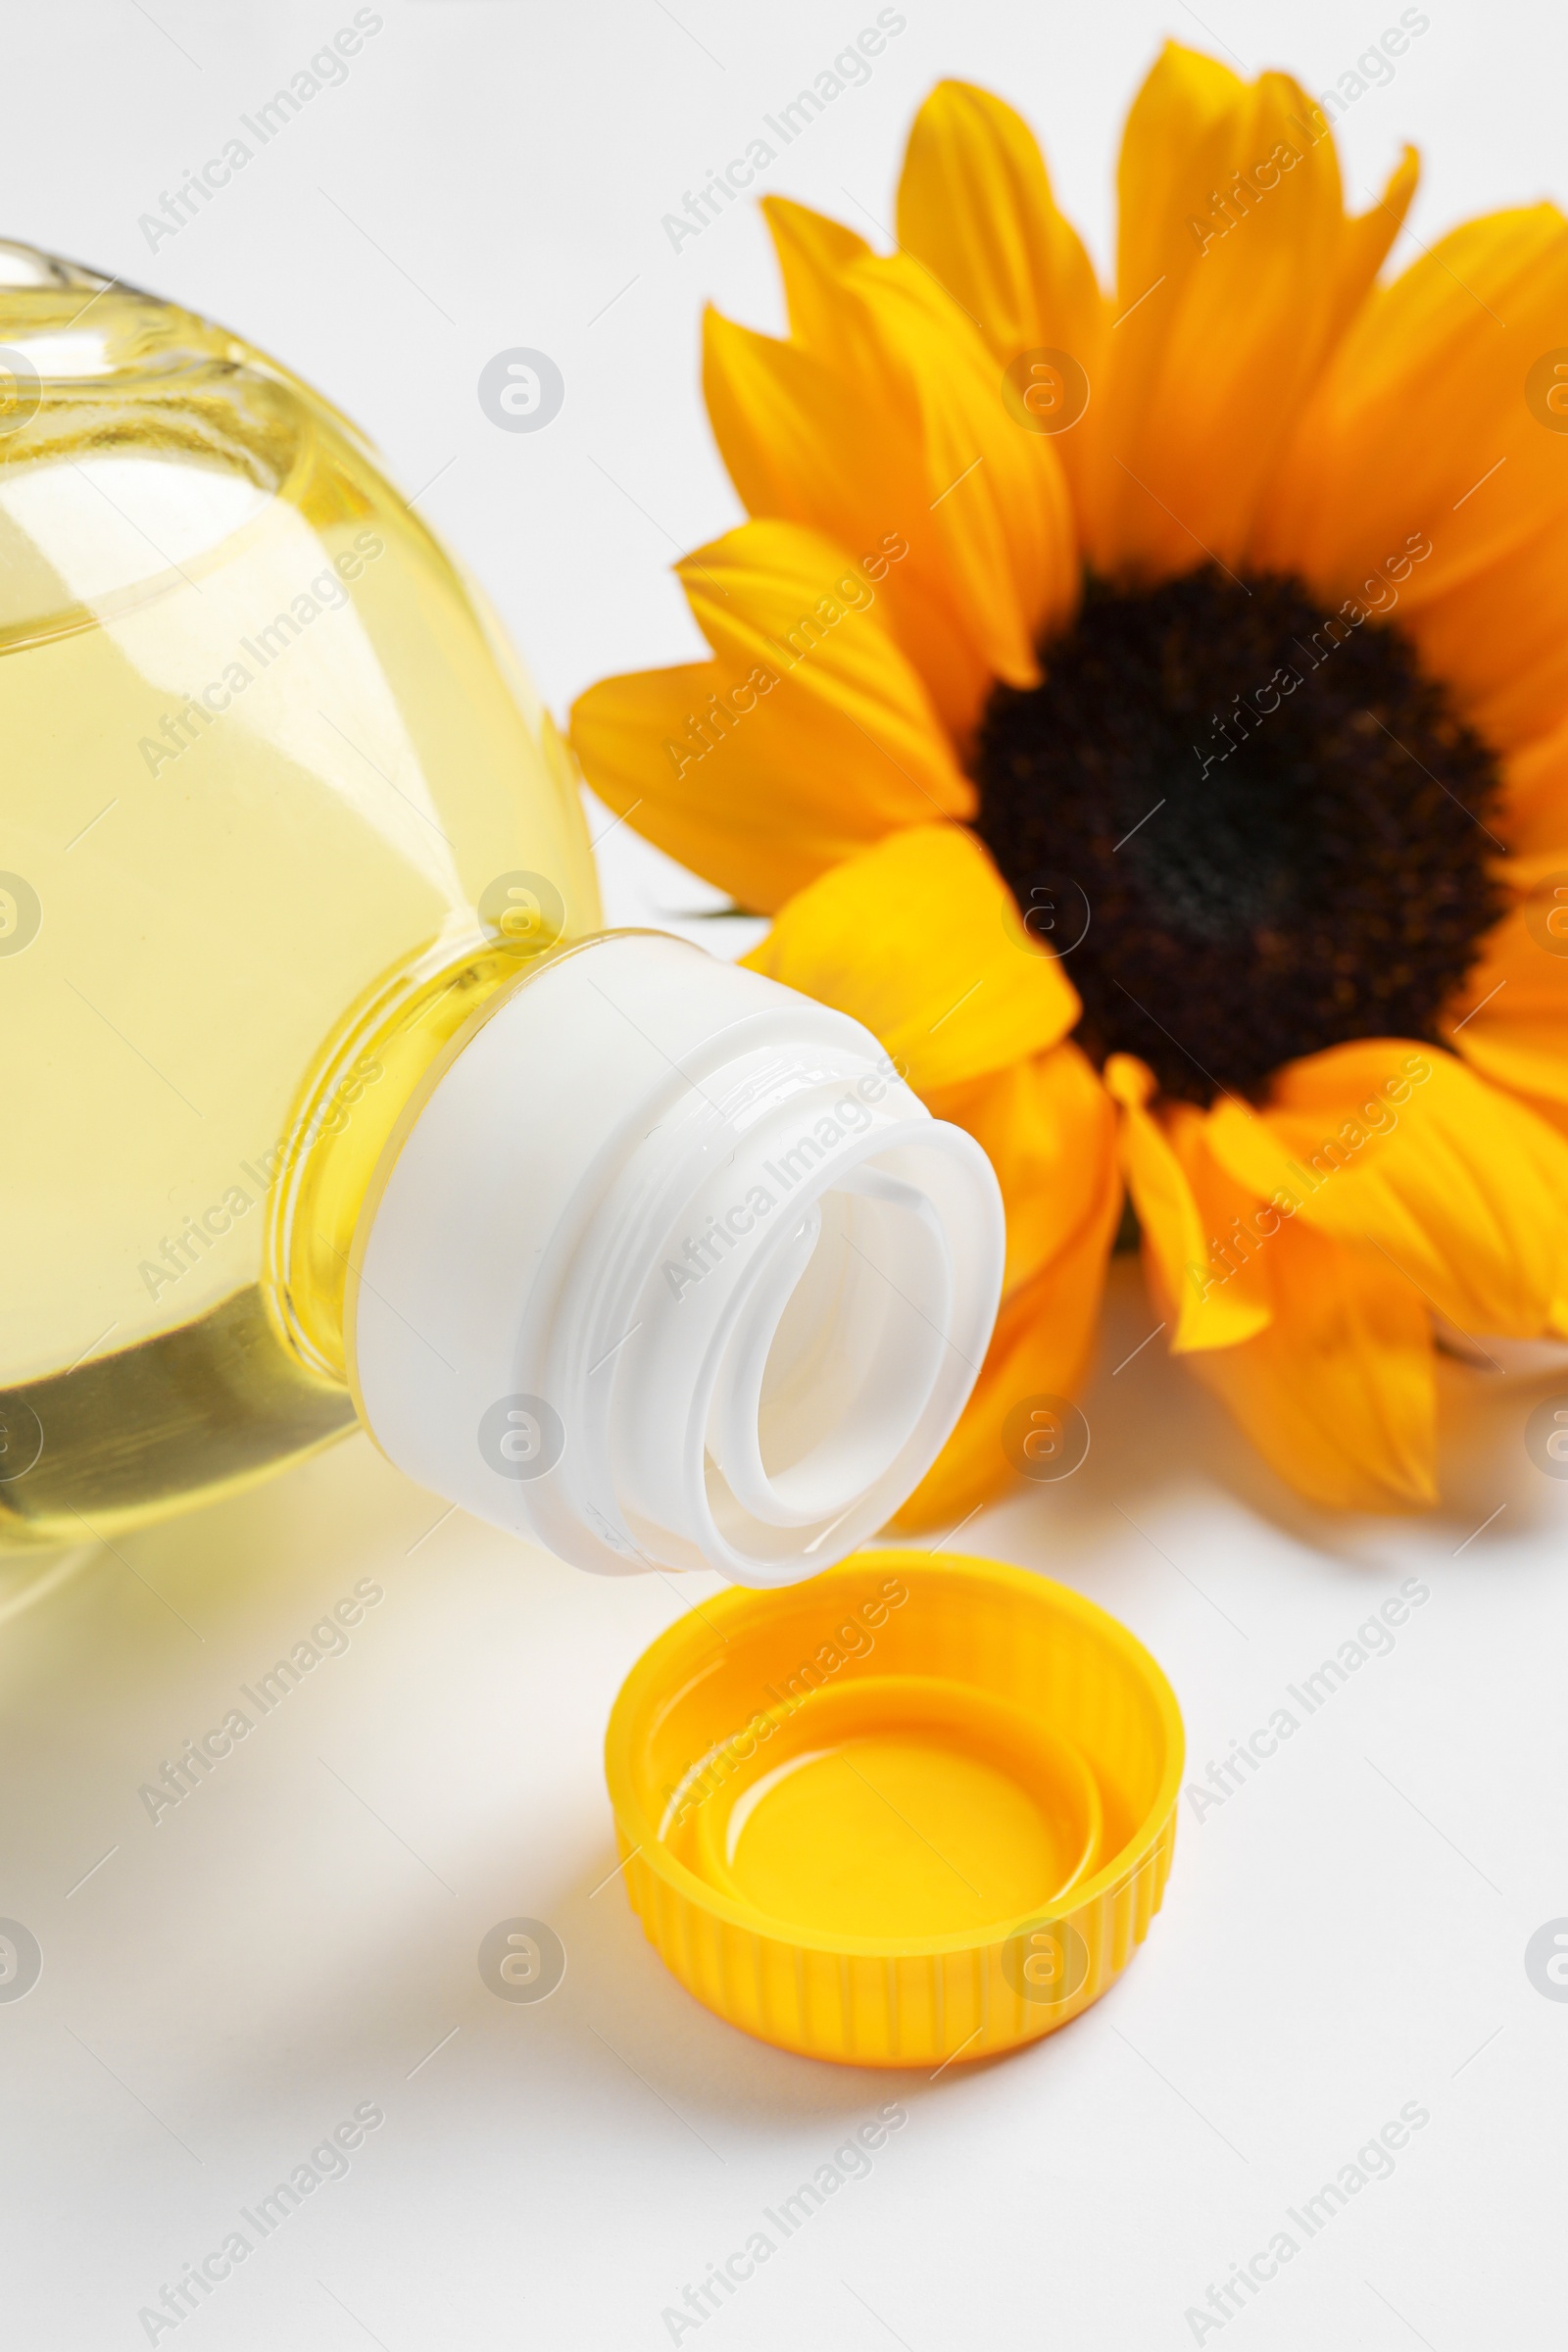 Photo of Bottle of cooking oil and sunflower on white table, closeup